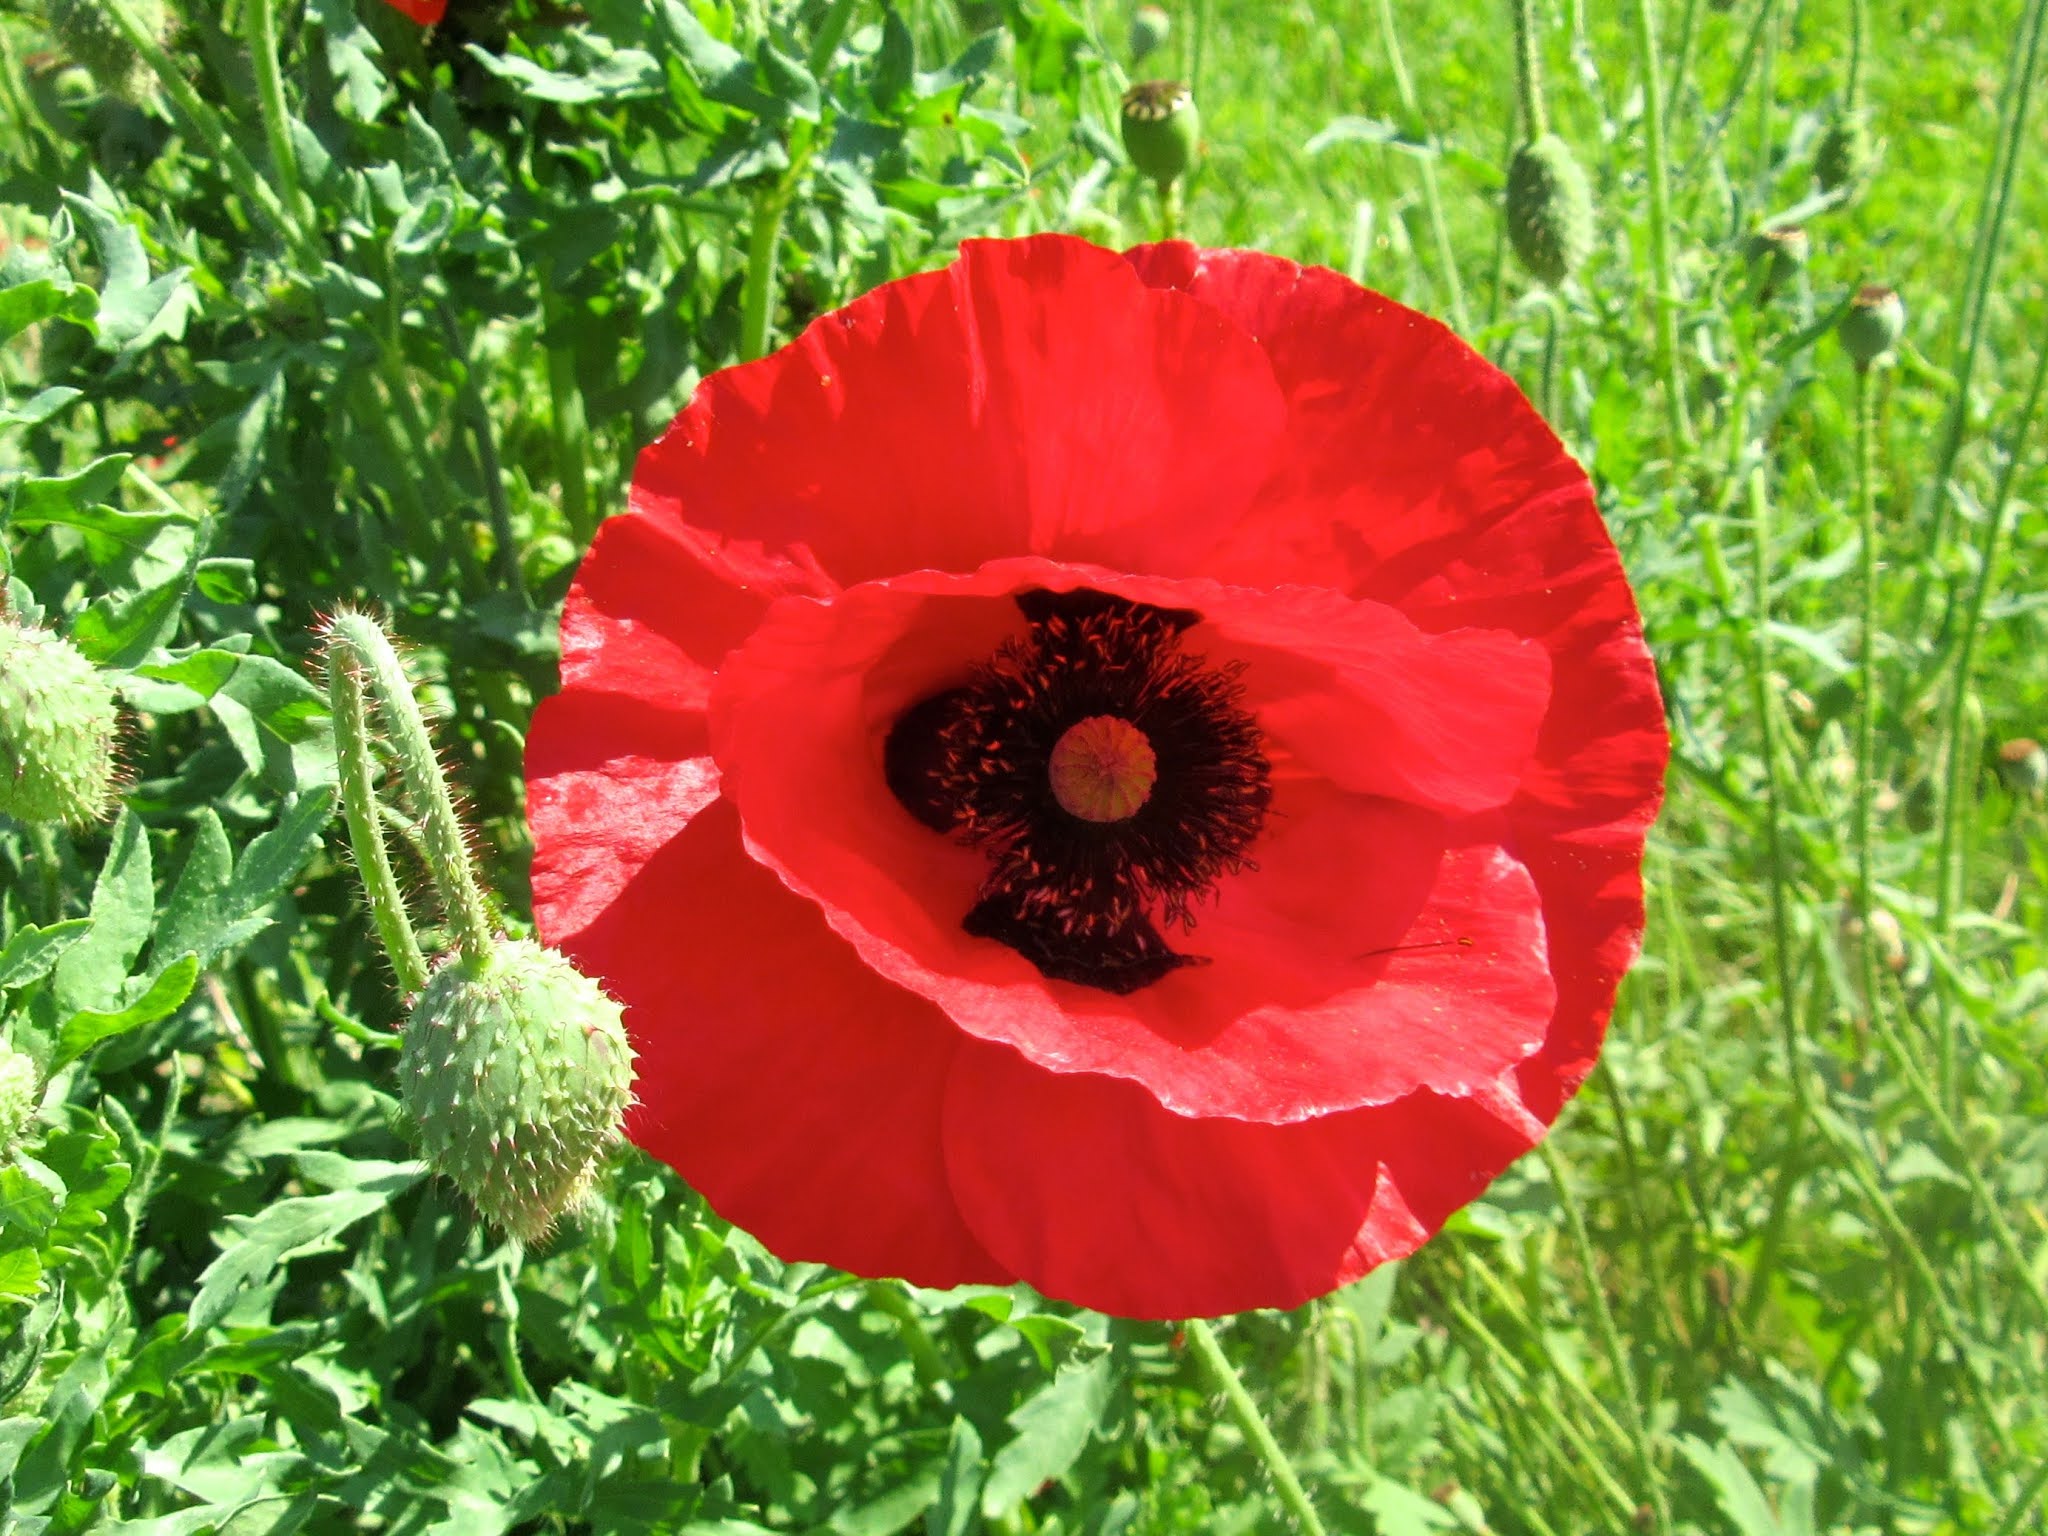 Why the Red Poppy Became a Symbol of Remembrance